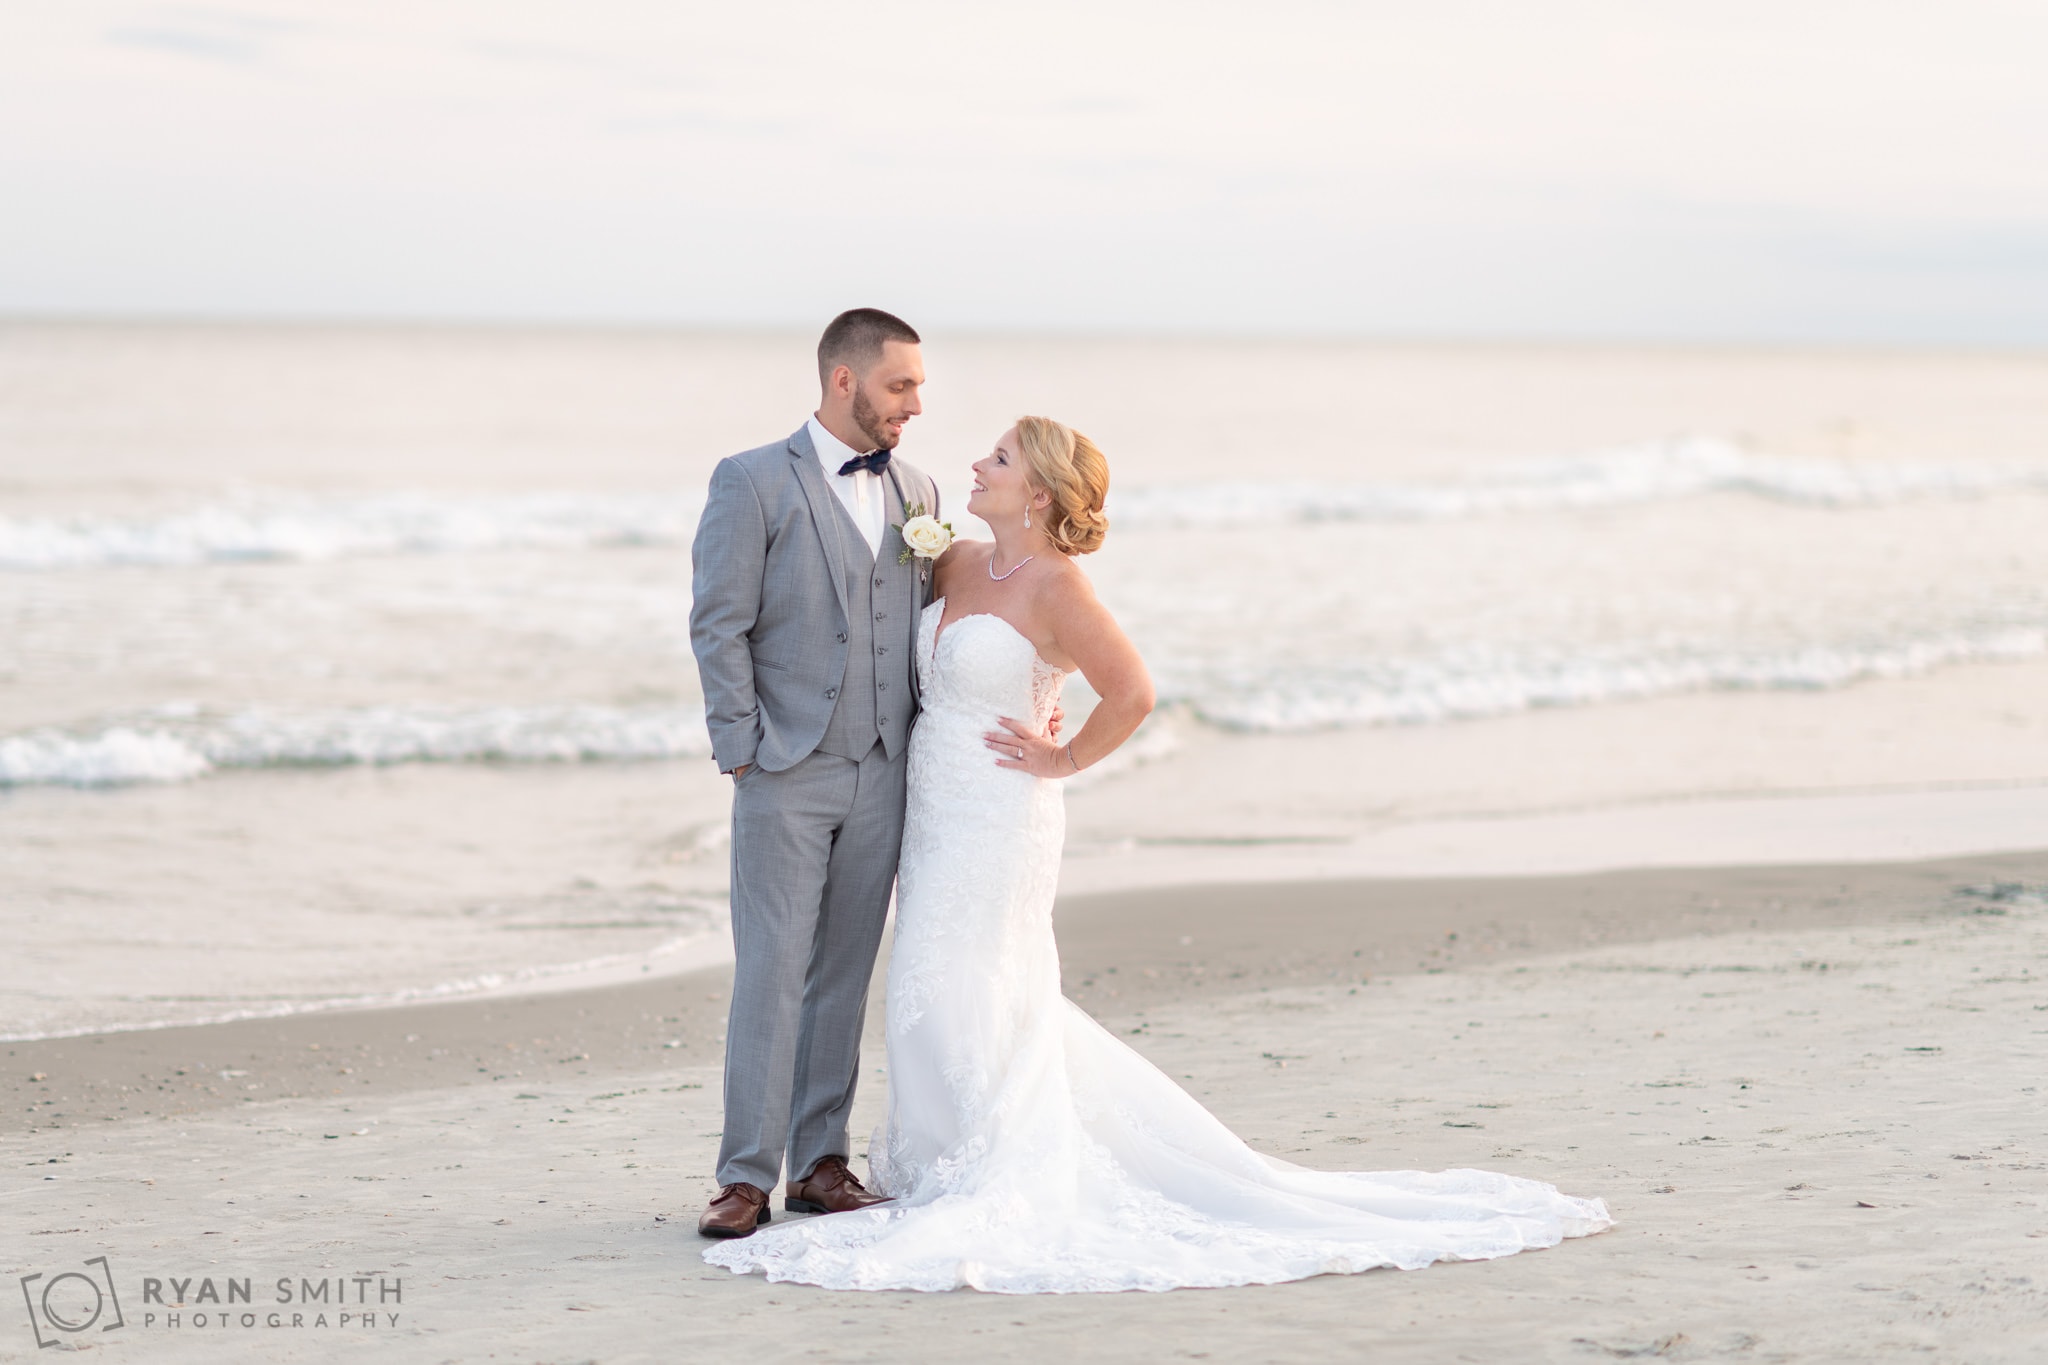 Bride and groom portraits in front of the ocean - 21 Main Events - North Myrtle Beach